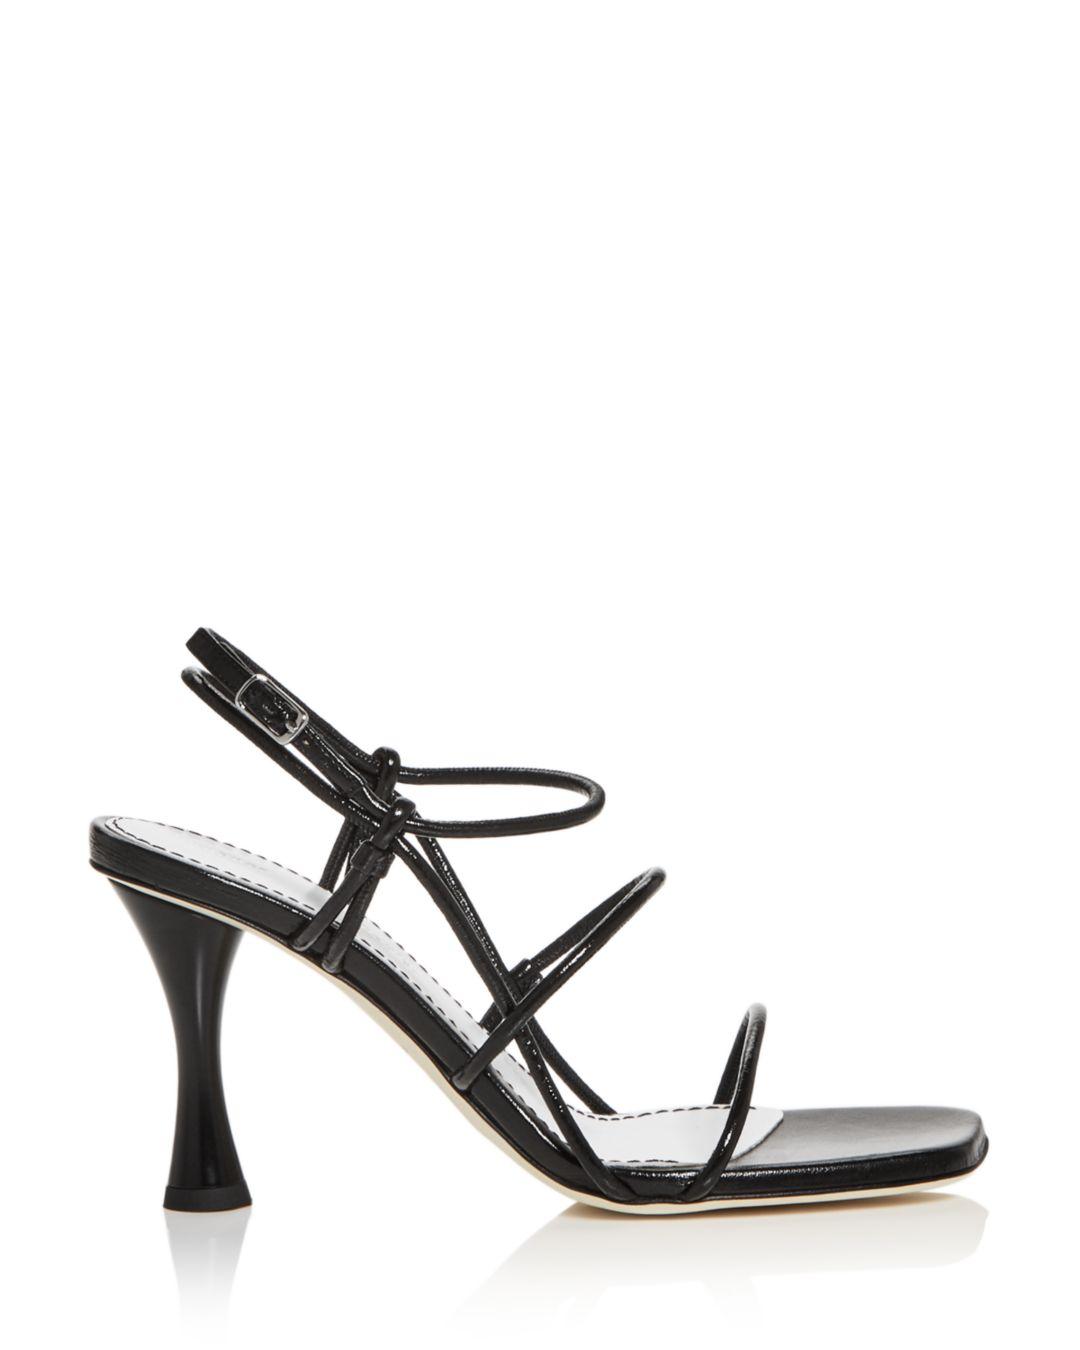 Proenza Schouler Leather Strappy Sandals in Nero (Black) - Save 52% - Lyst